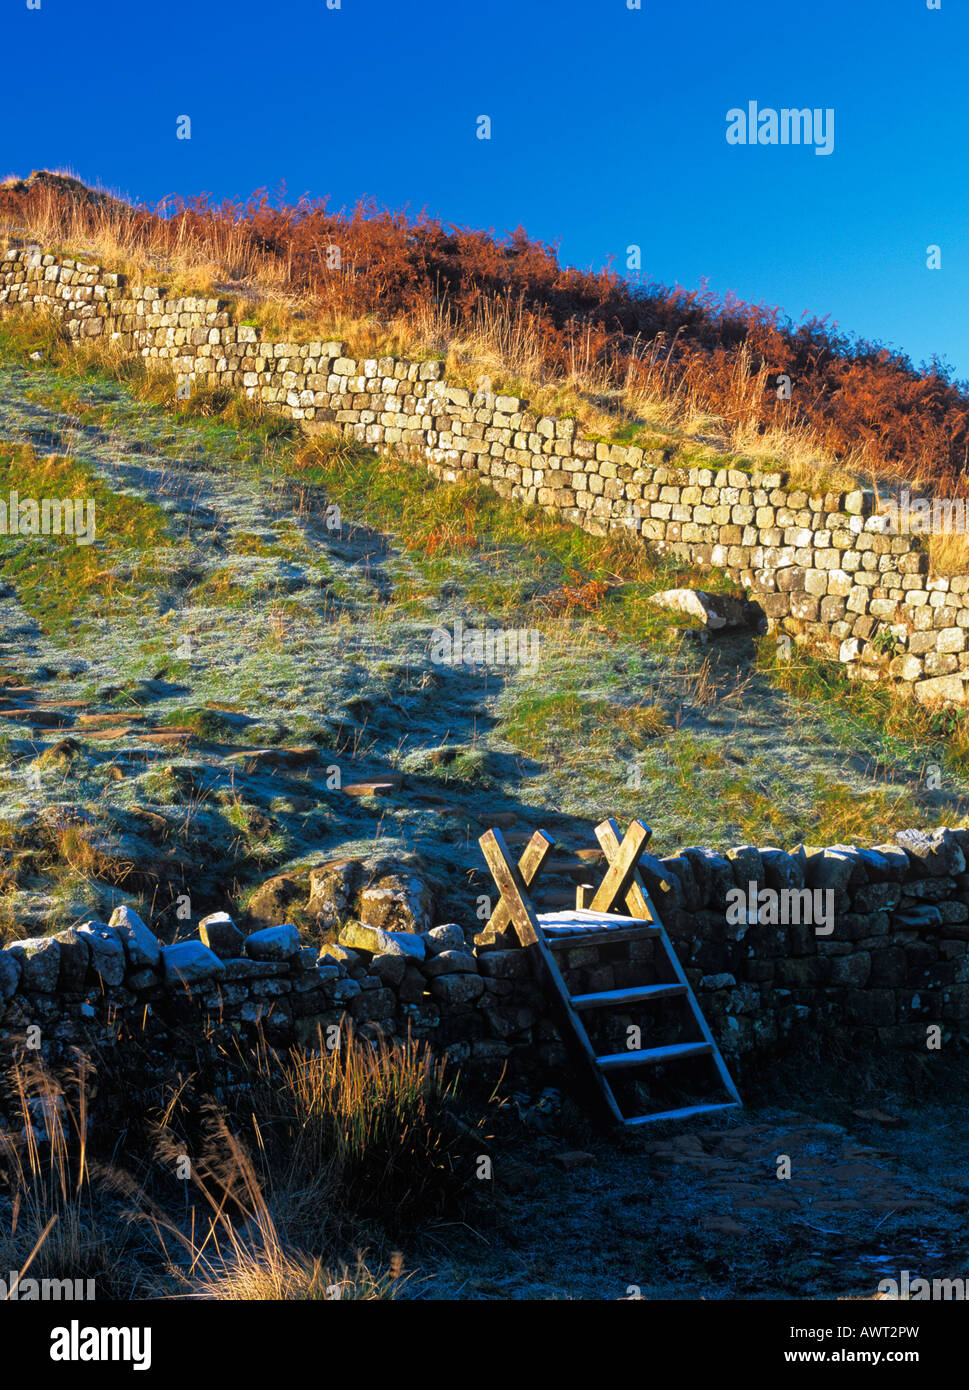 A wooden ladder stile crossing a drystone wall on a frosty morning on Hadrian's Wall National Trail in Northumberland National Park, England Stock Photo